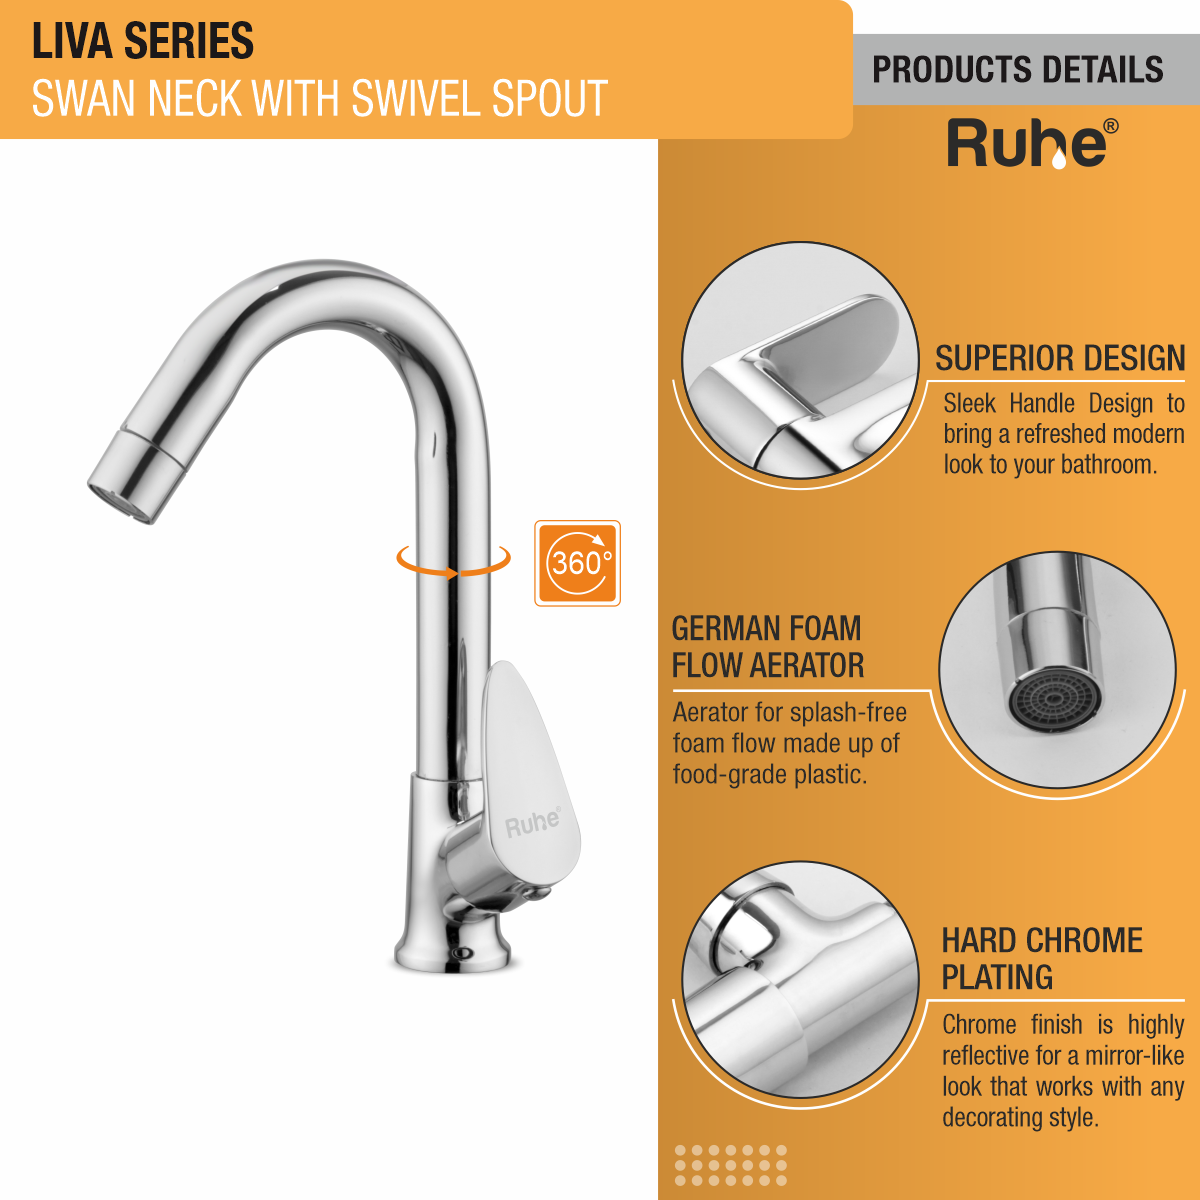 Liva Swan Neck with Swivel Spout Faucet product details